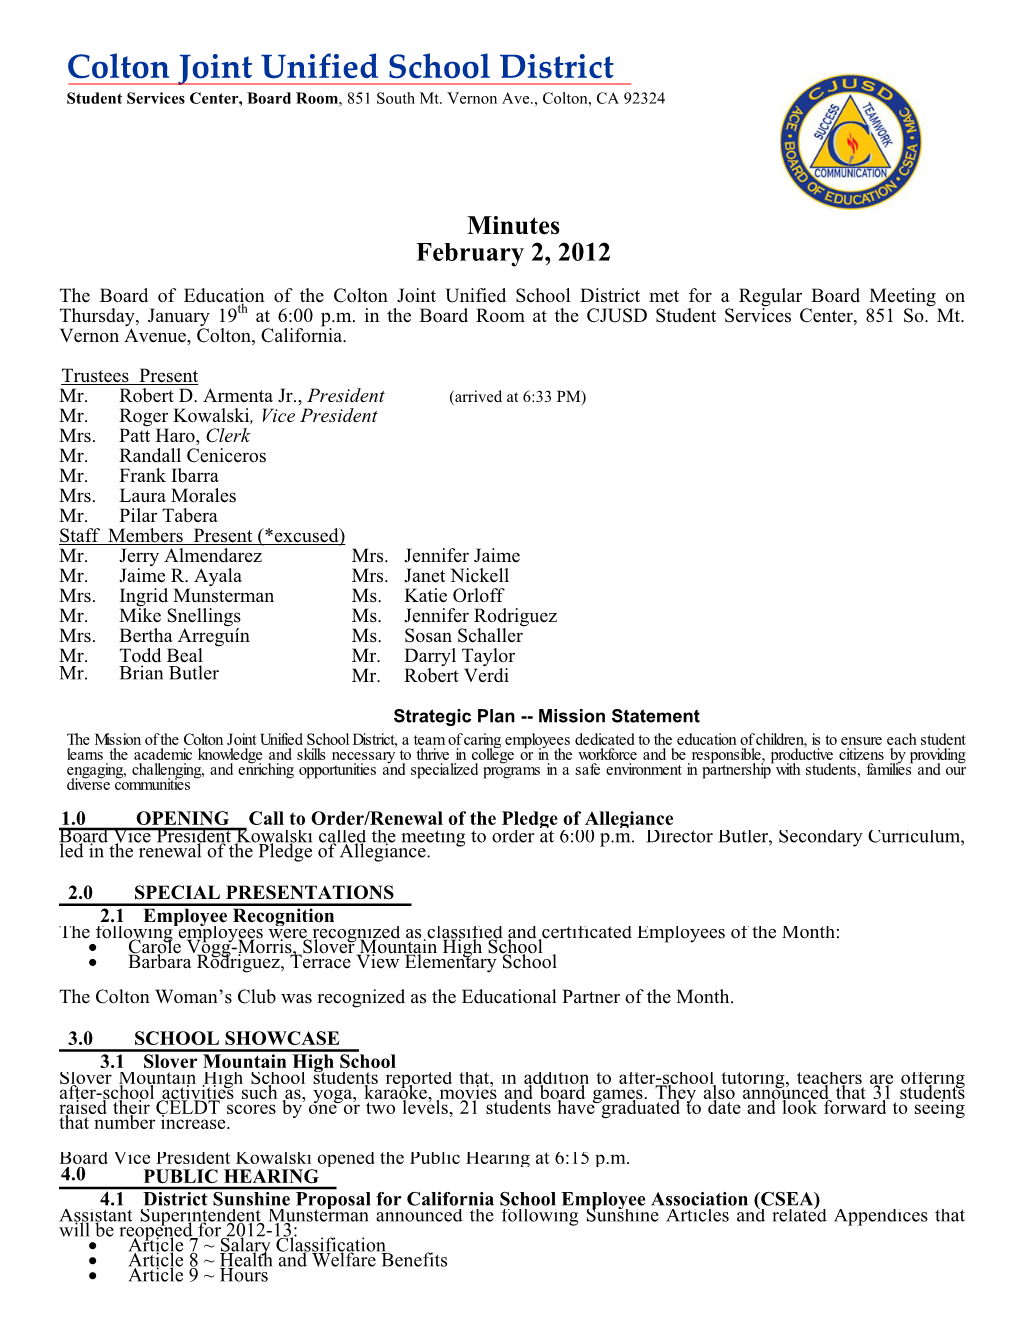 February 2, 2012 the Board of Education of the Colton Joint Unified School District Met for a Regular Board Meeting on Thursday, January 19Th at 6:00 P.M